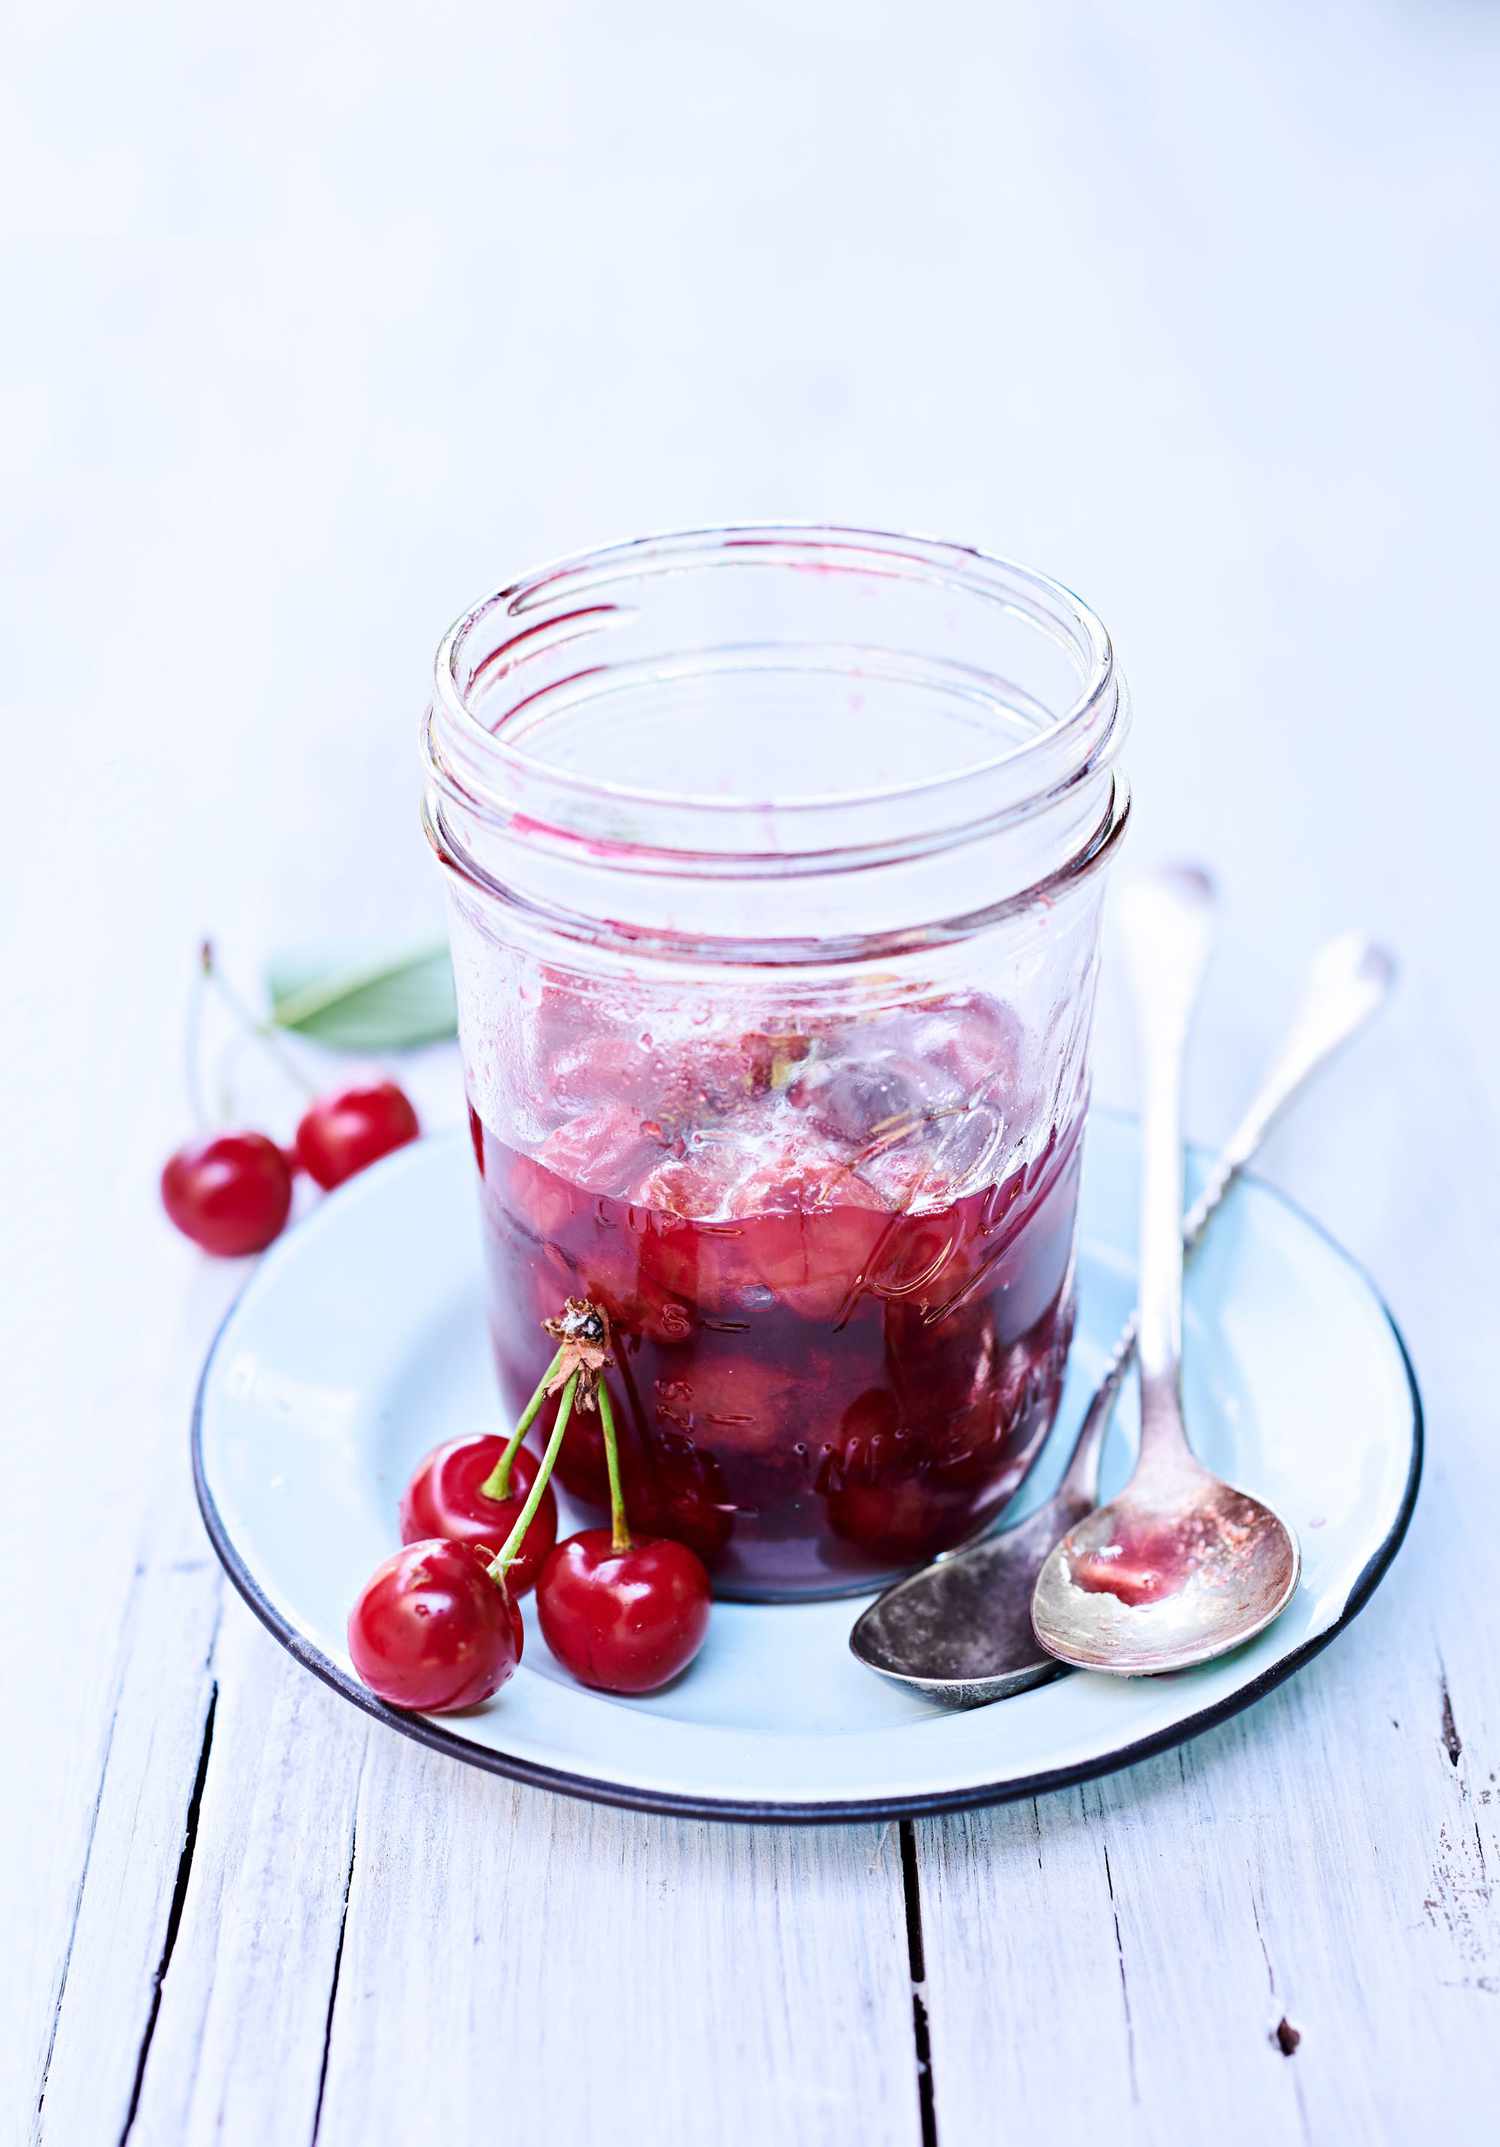 sour-cherry preserves in a glass jar